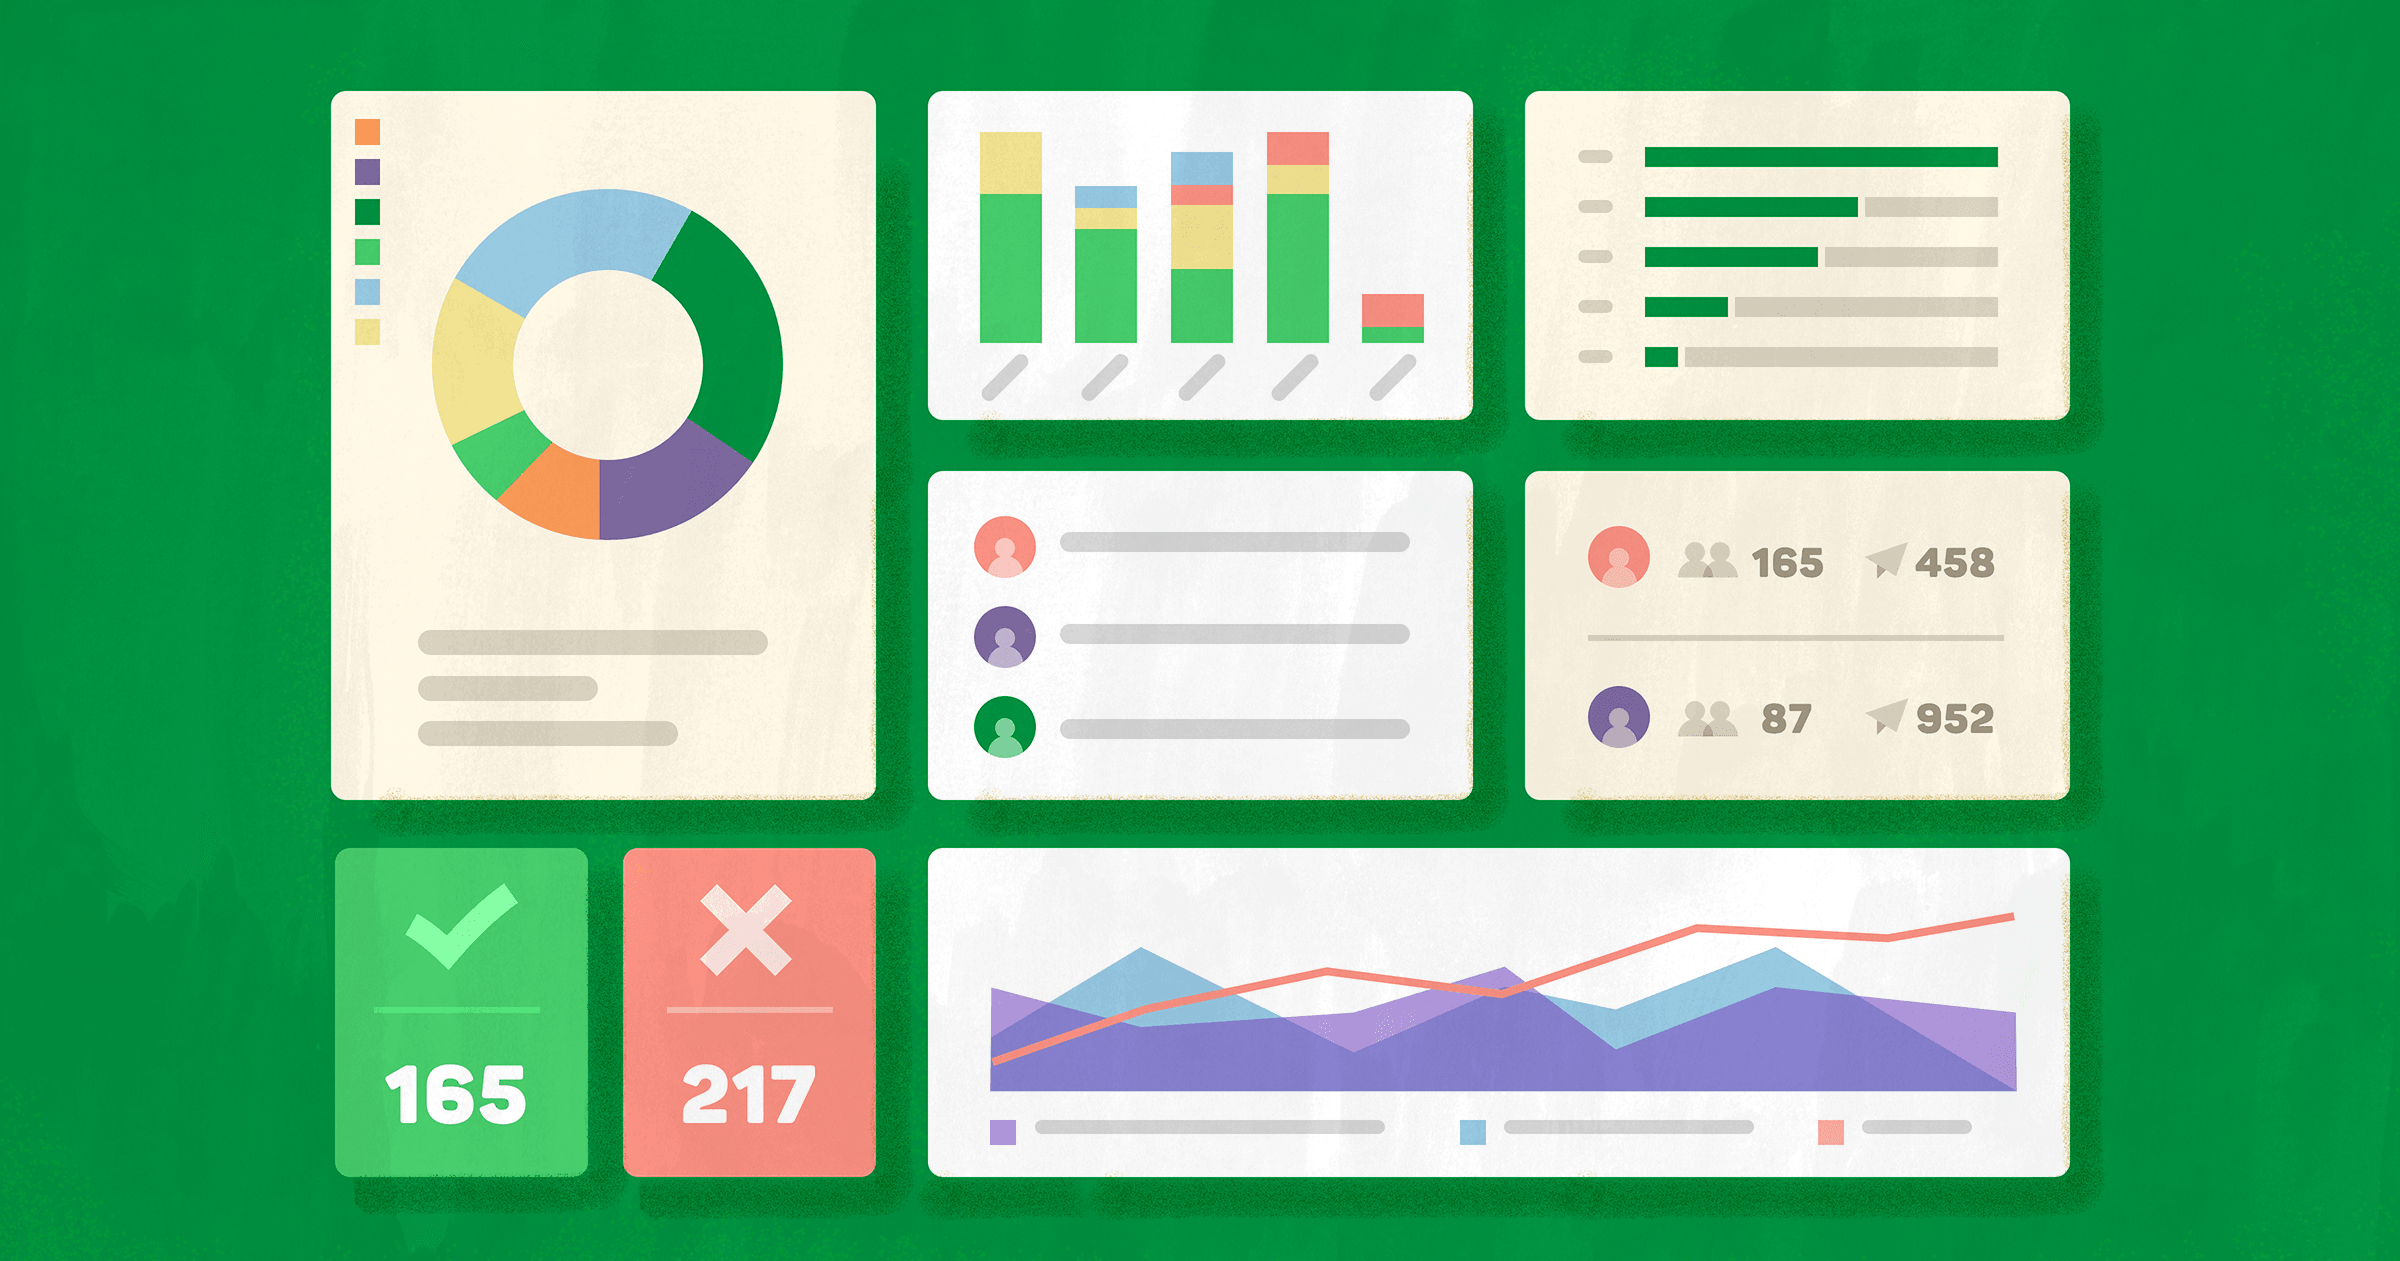 Key Financial Charts and Graphs for Every Business - Ubiq BI